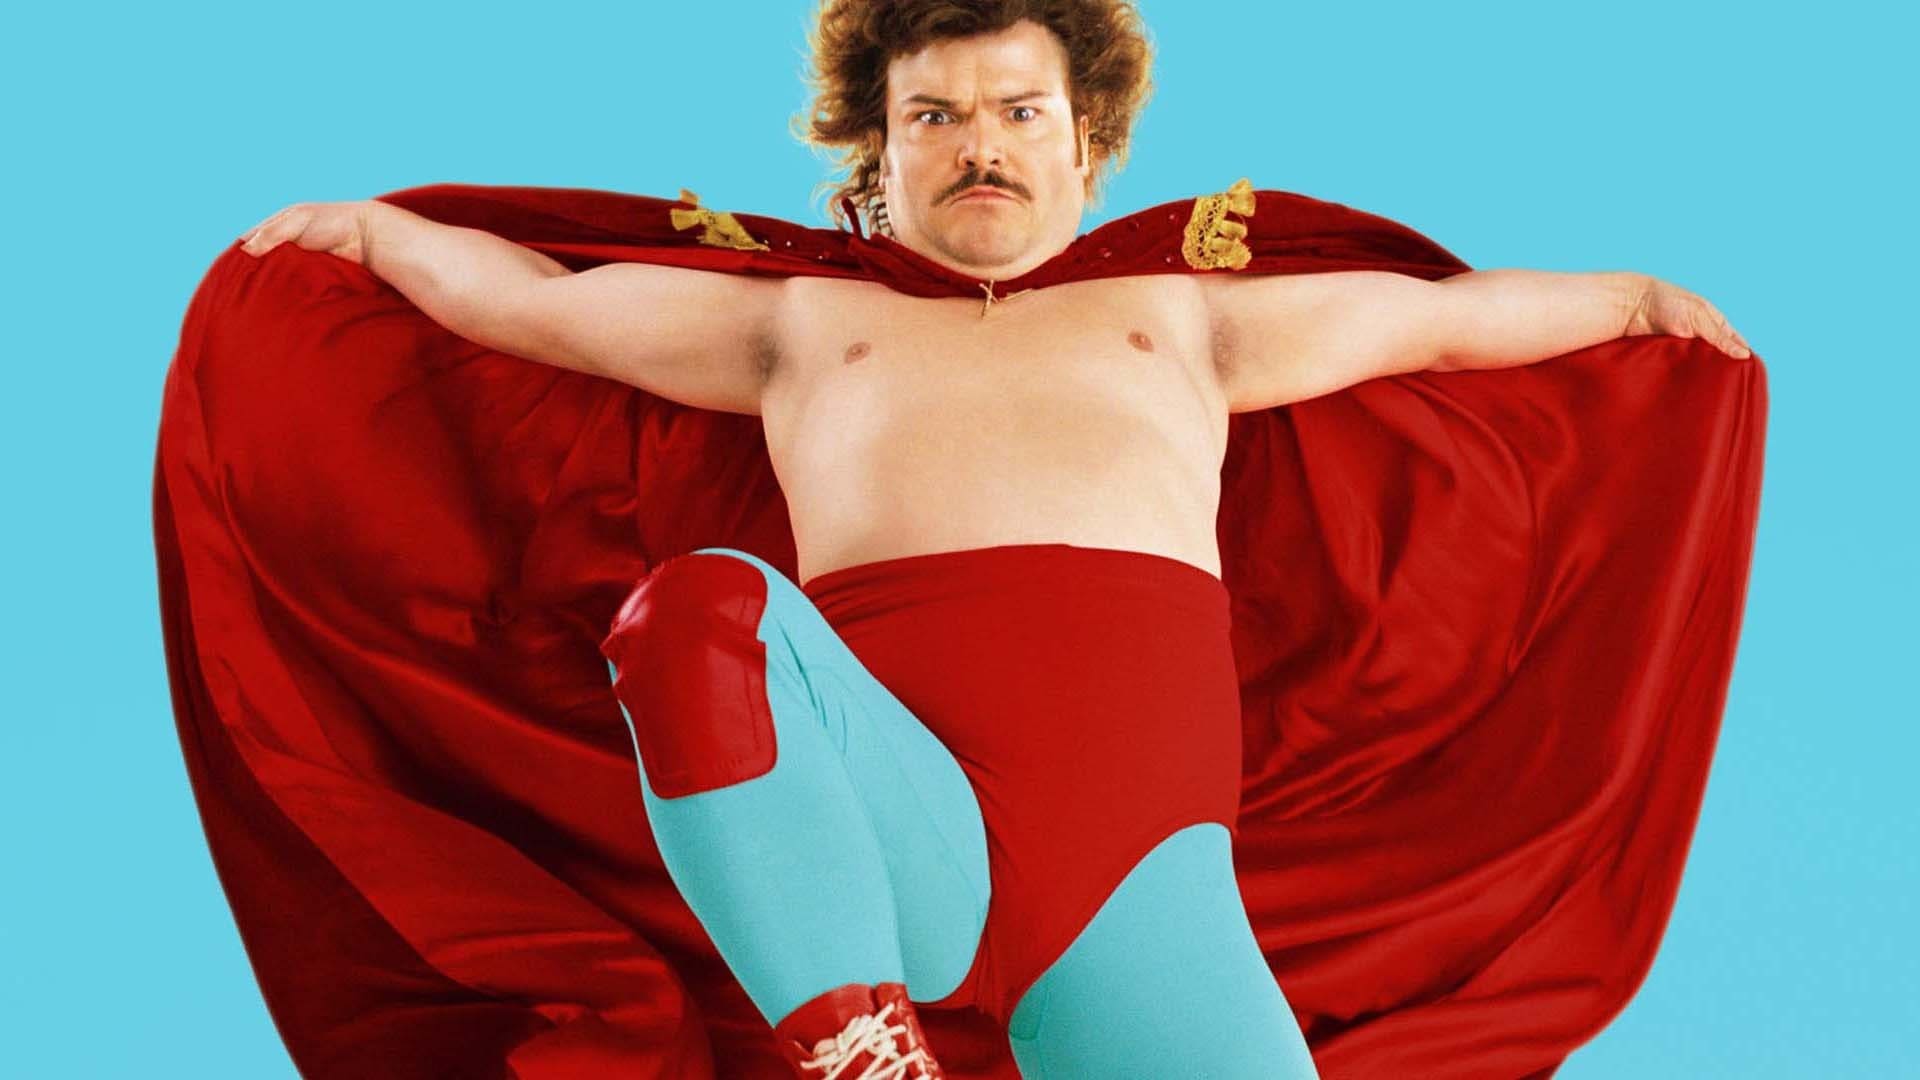 Amazon.com: Sometimes You Wear Stretchy Pants Nacho Libre Decorative Linen  Throw Cushion Pillow Case with Insert White : Home & Kitchen